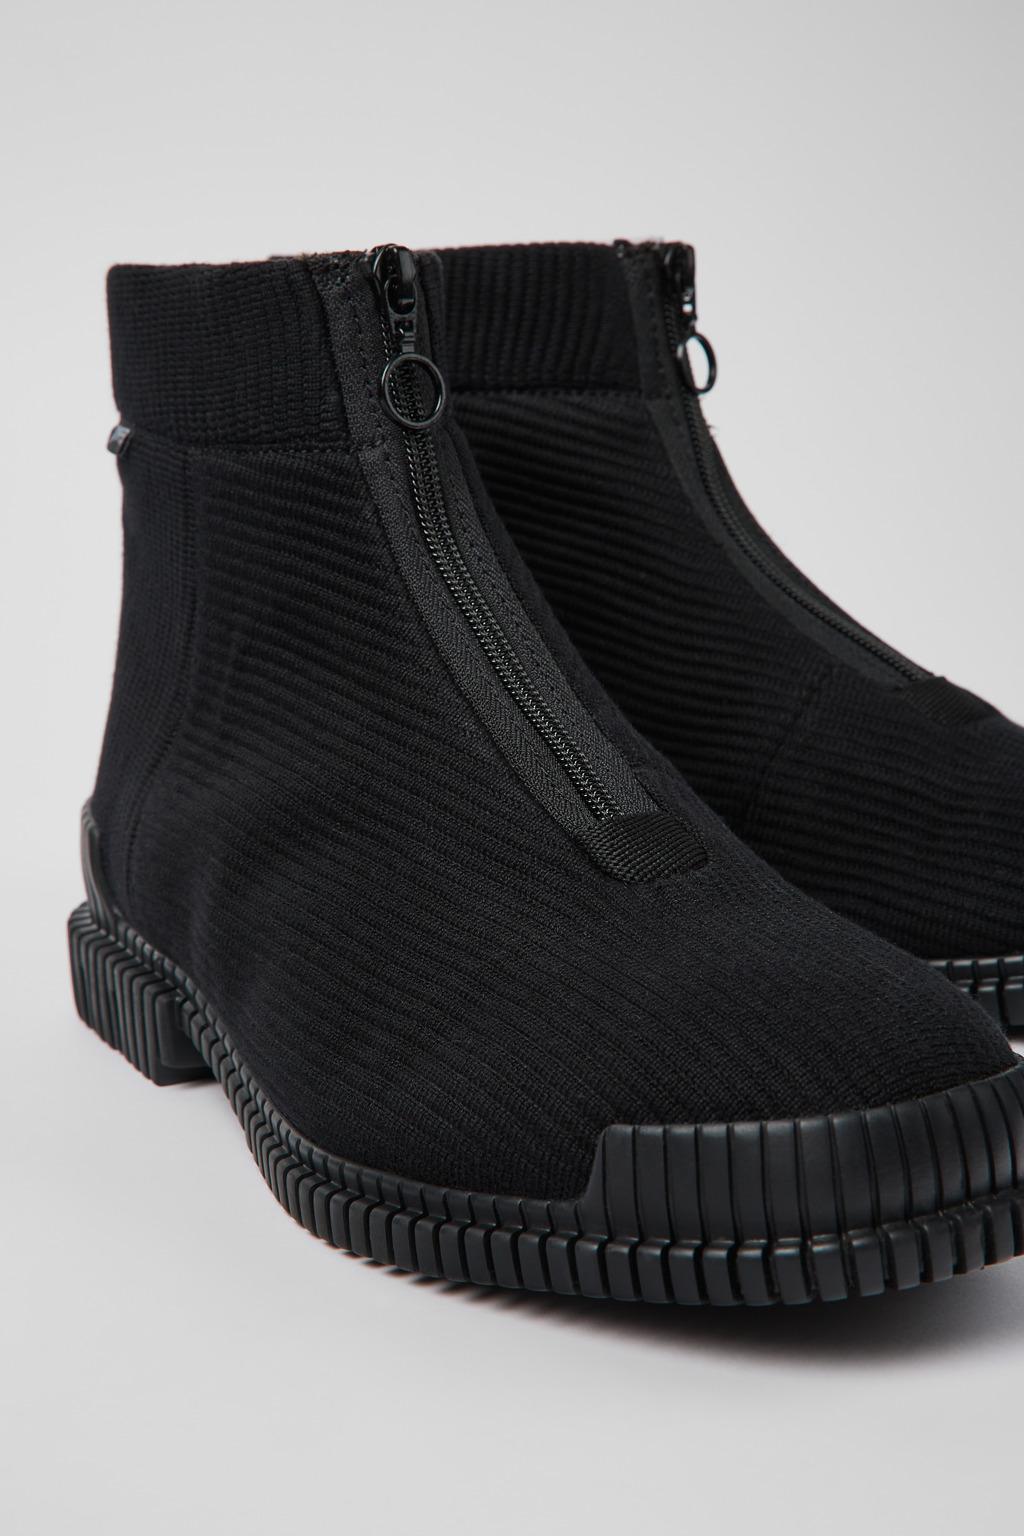 Pix Black Ankle Boots for Men - Fall/Winter collection - Camper USA